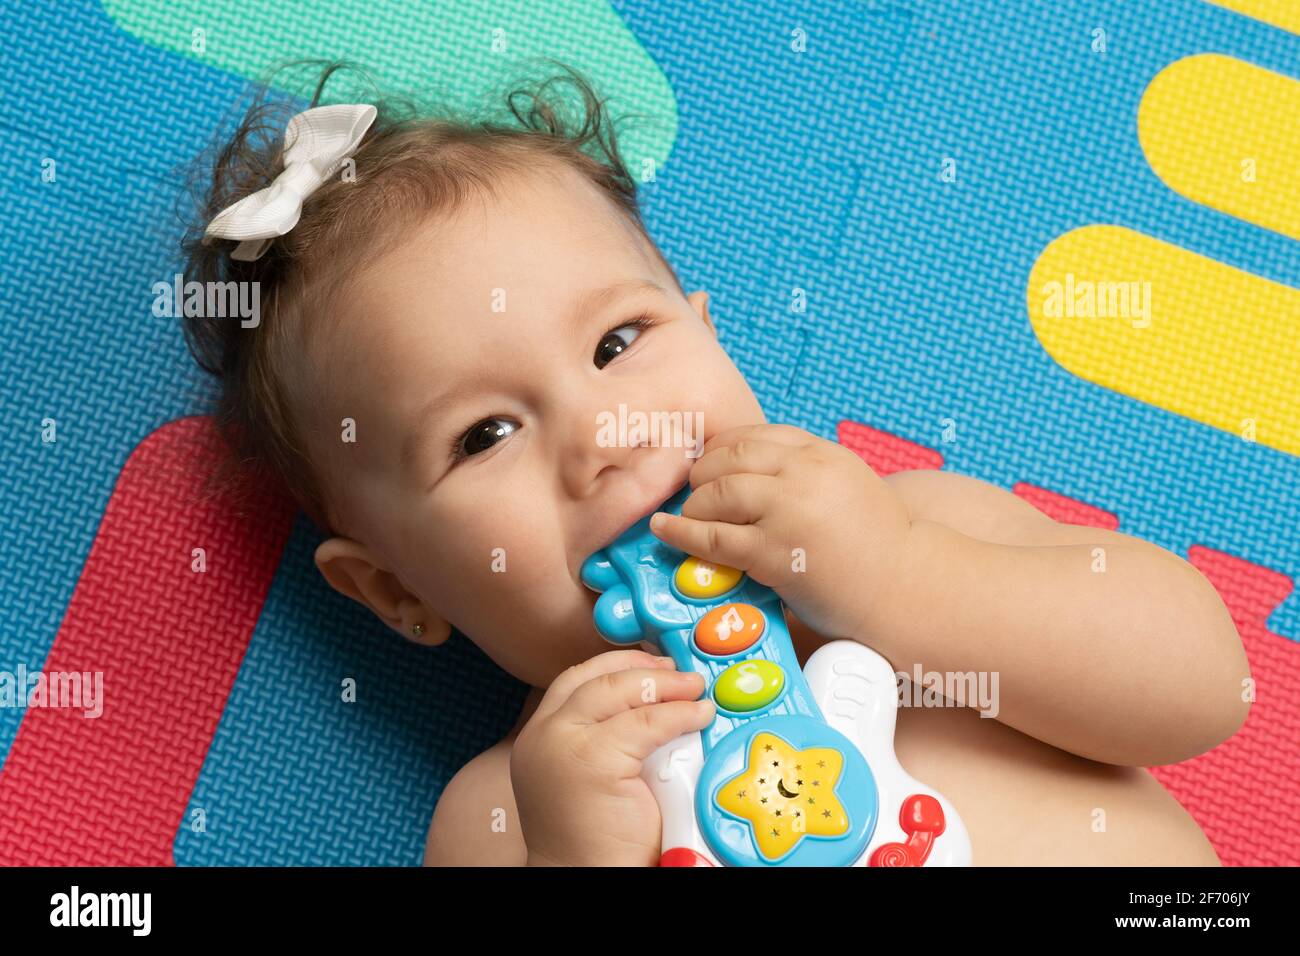 7 month old baby girl closeup on back mouthing plastic toy, fingers in mouth Stock Photo